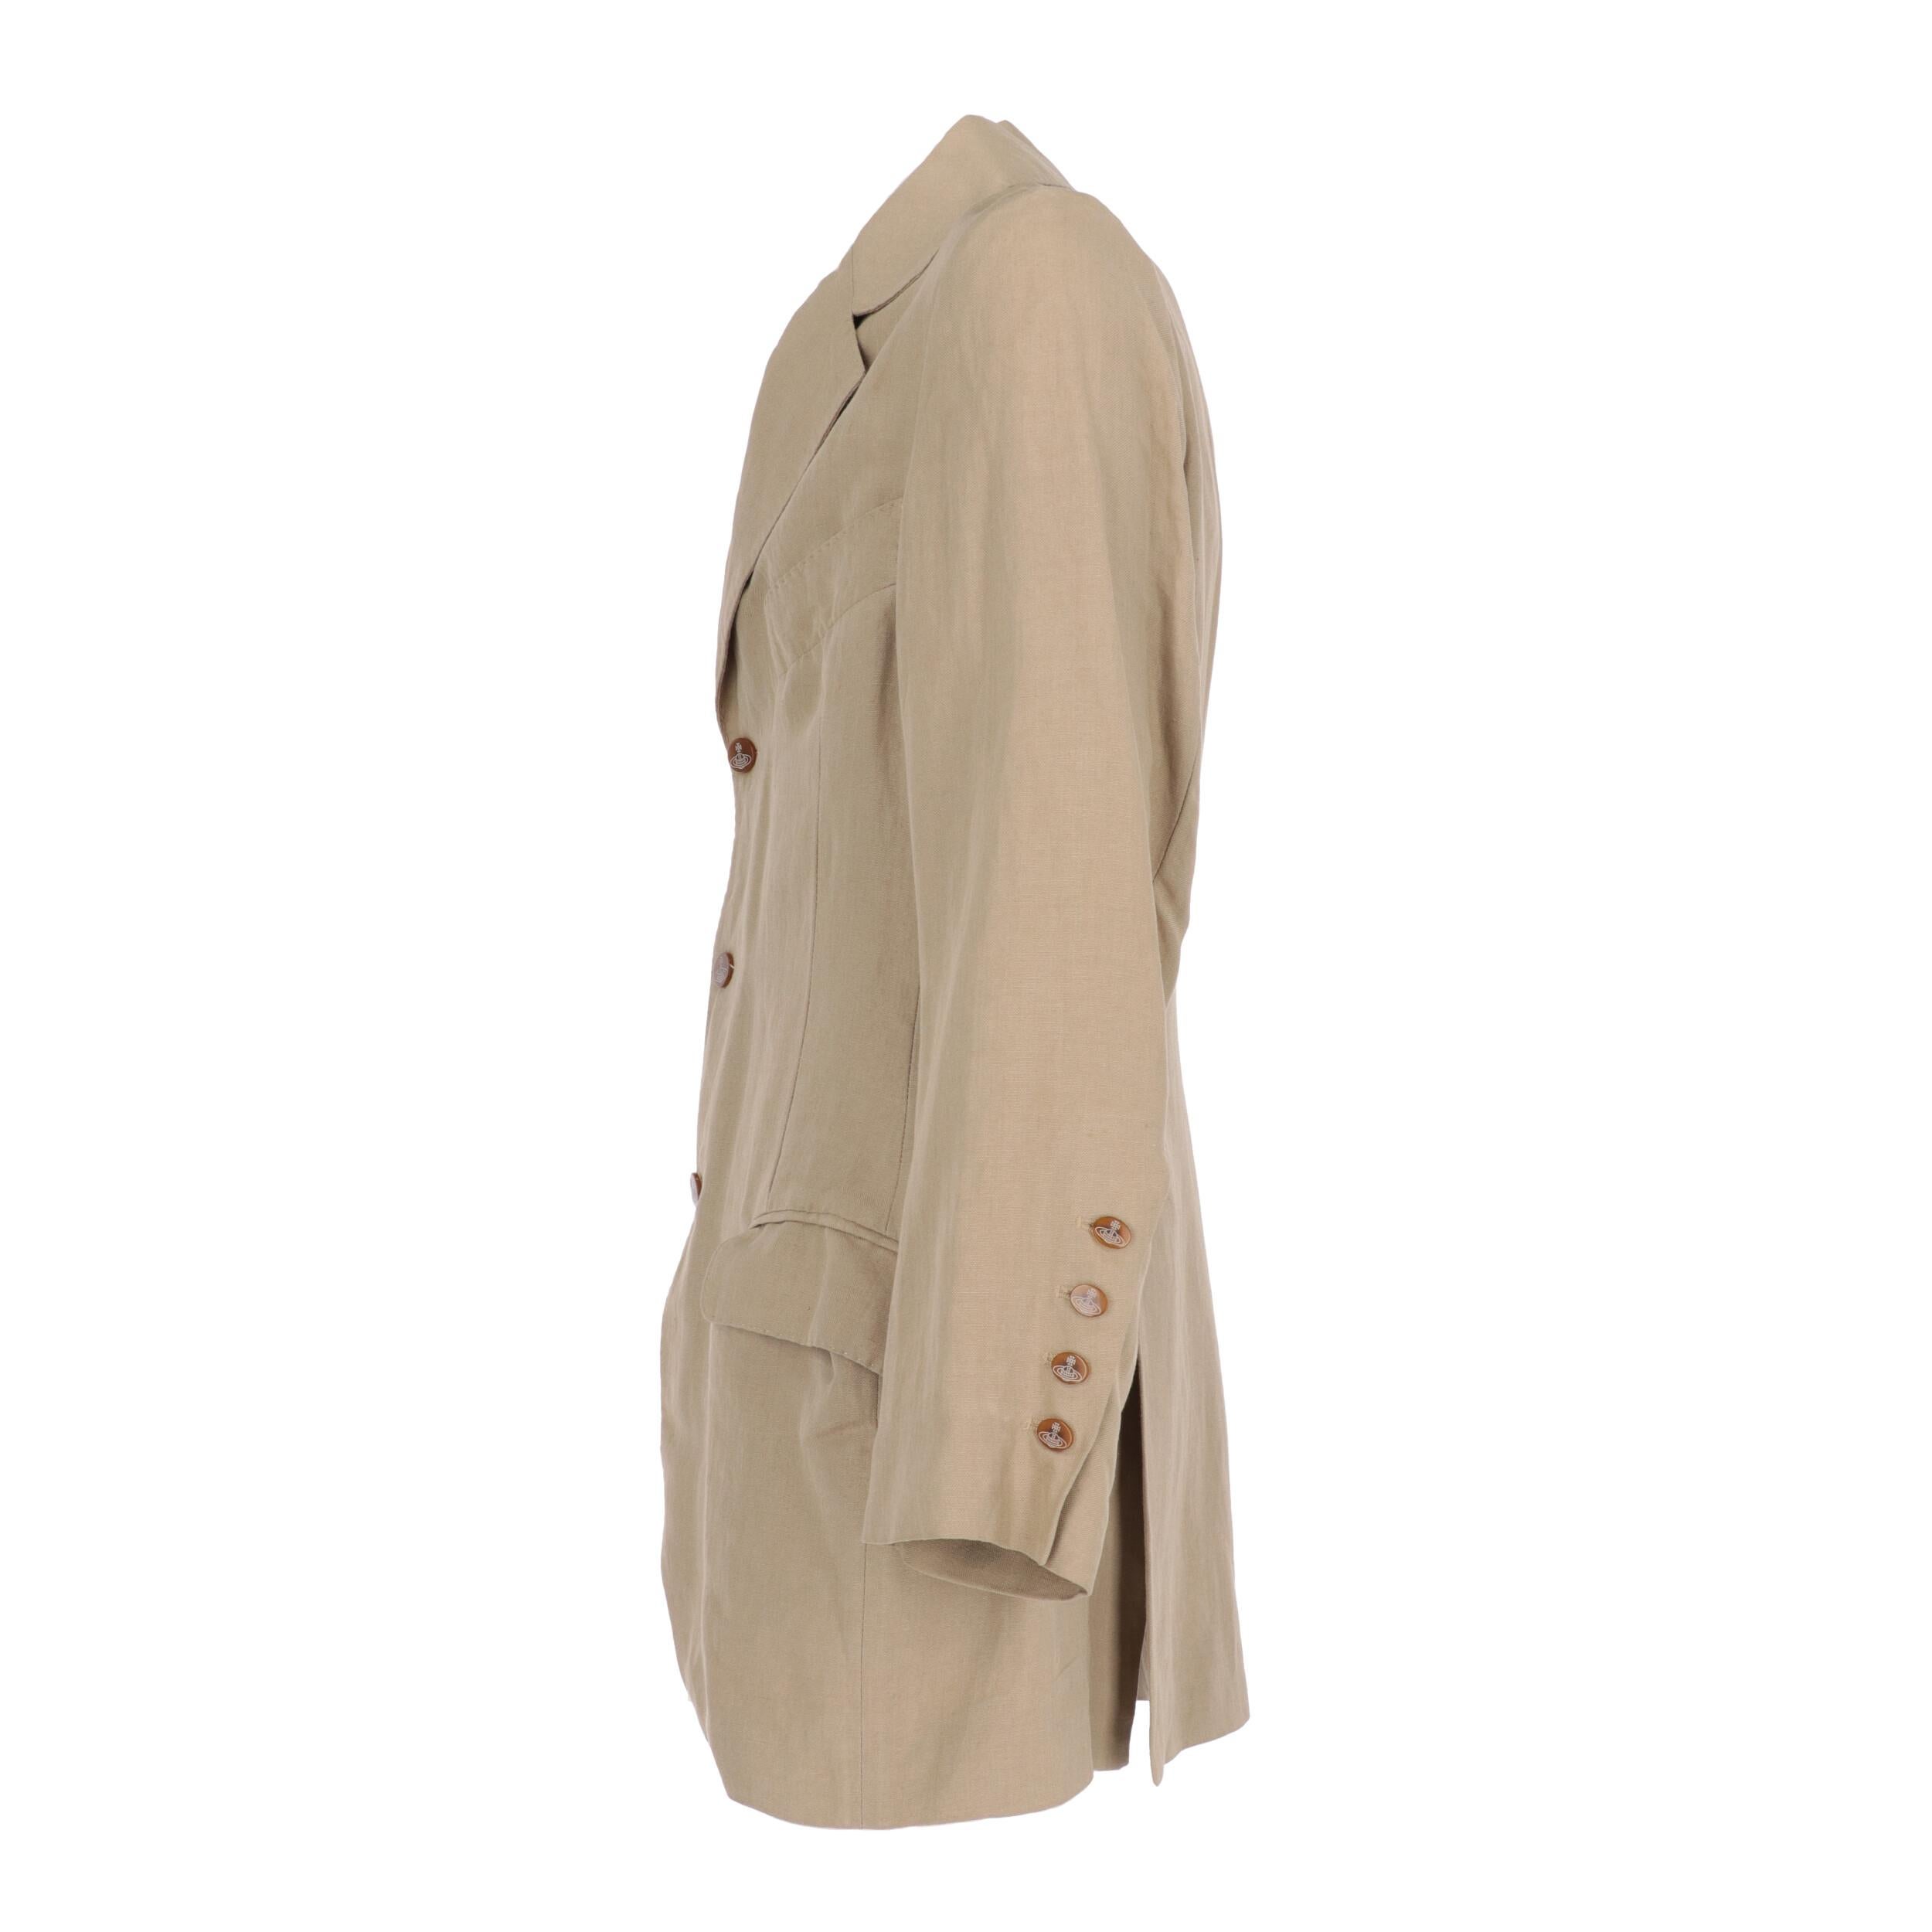 Vivienne Westwood beige linen blend fabric blazer. Model with classic lapel collar, front closure with logoed buttons, flap pockets and long sleeves with buttoned cuffs.

Years: 90s

Made in Italy

Size: 48 IT

Flat measurements

Height: 82 cm
Bust: